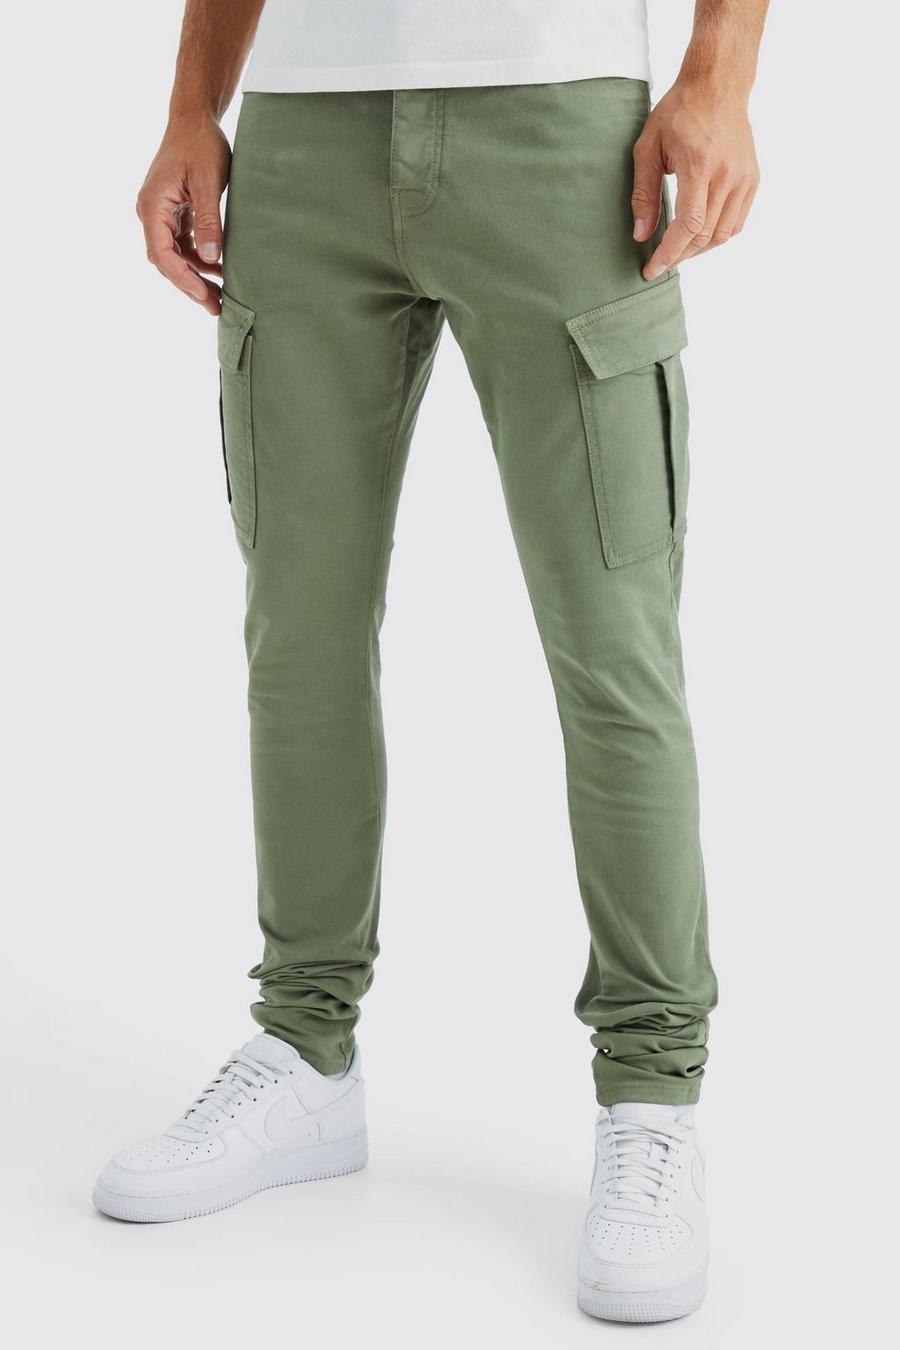 Olive green Tall Fixed Waist Skinny Stacked Cargo Trouser